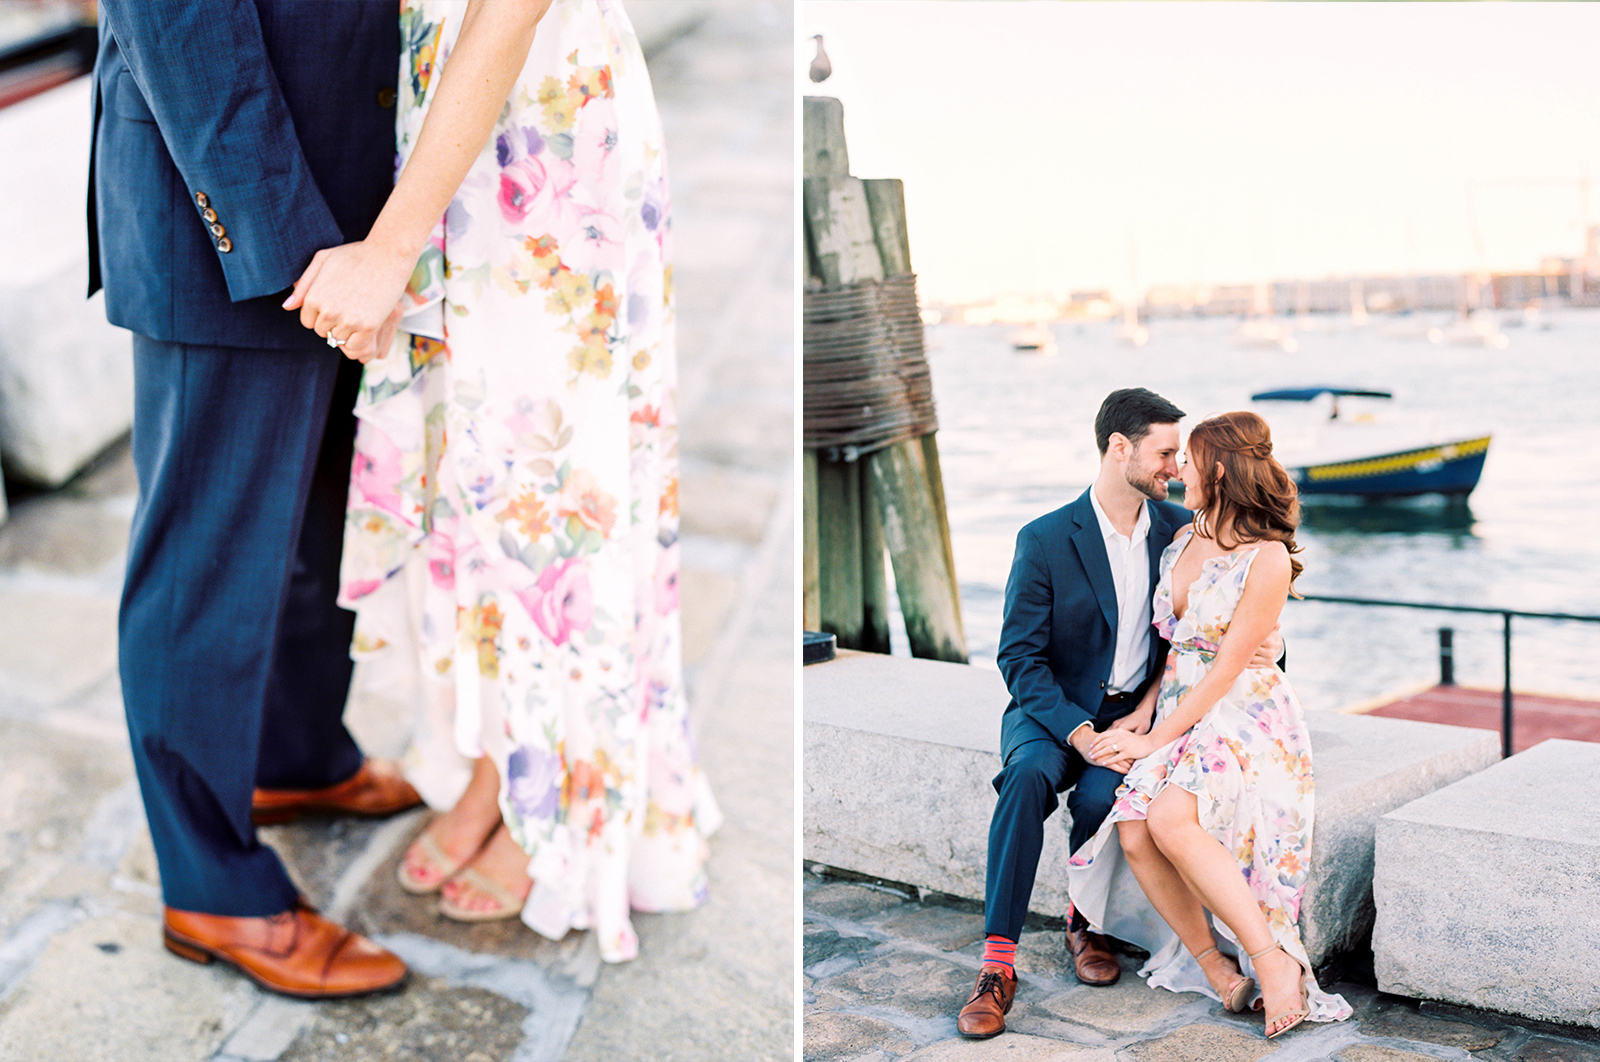 Spring/summer engagement session outfit ideas